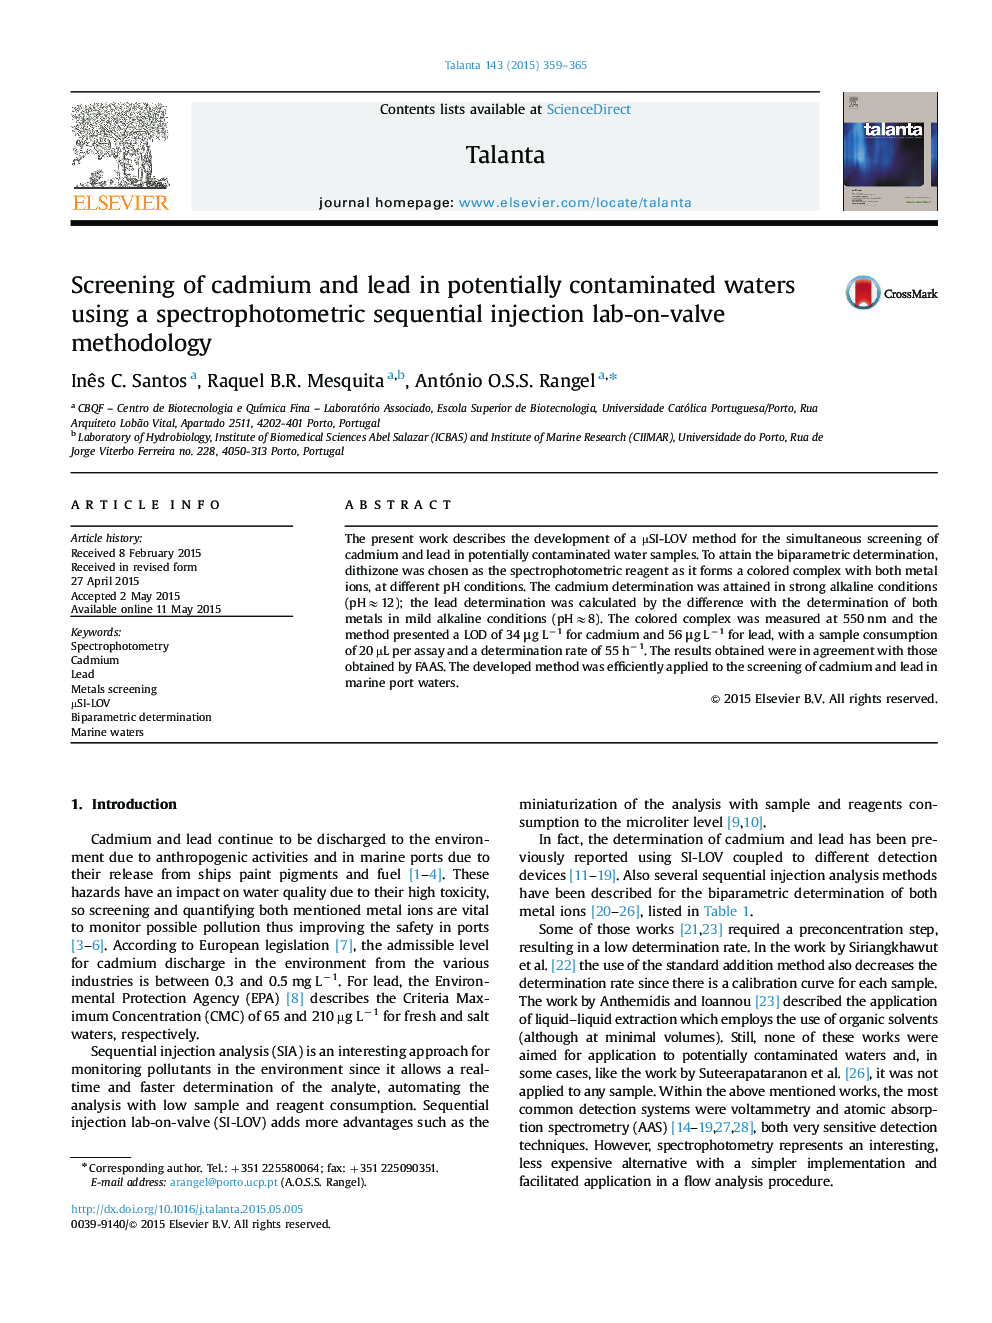 Screening of cadmium and lead in potentially contaminated waters using a spectrophotometric sequential injection lab-on-valve methodology